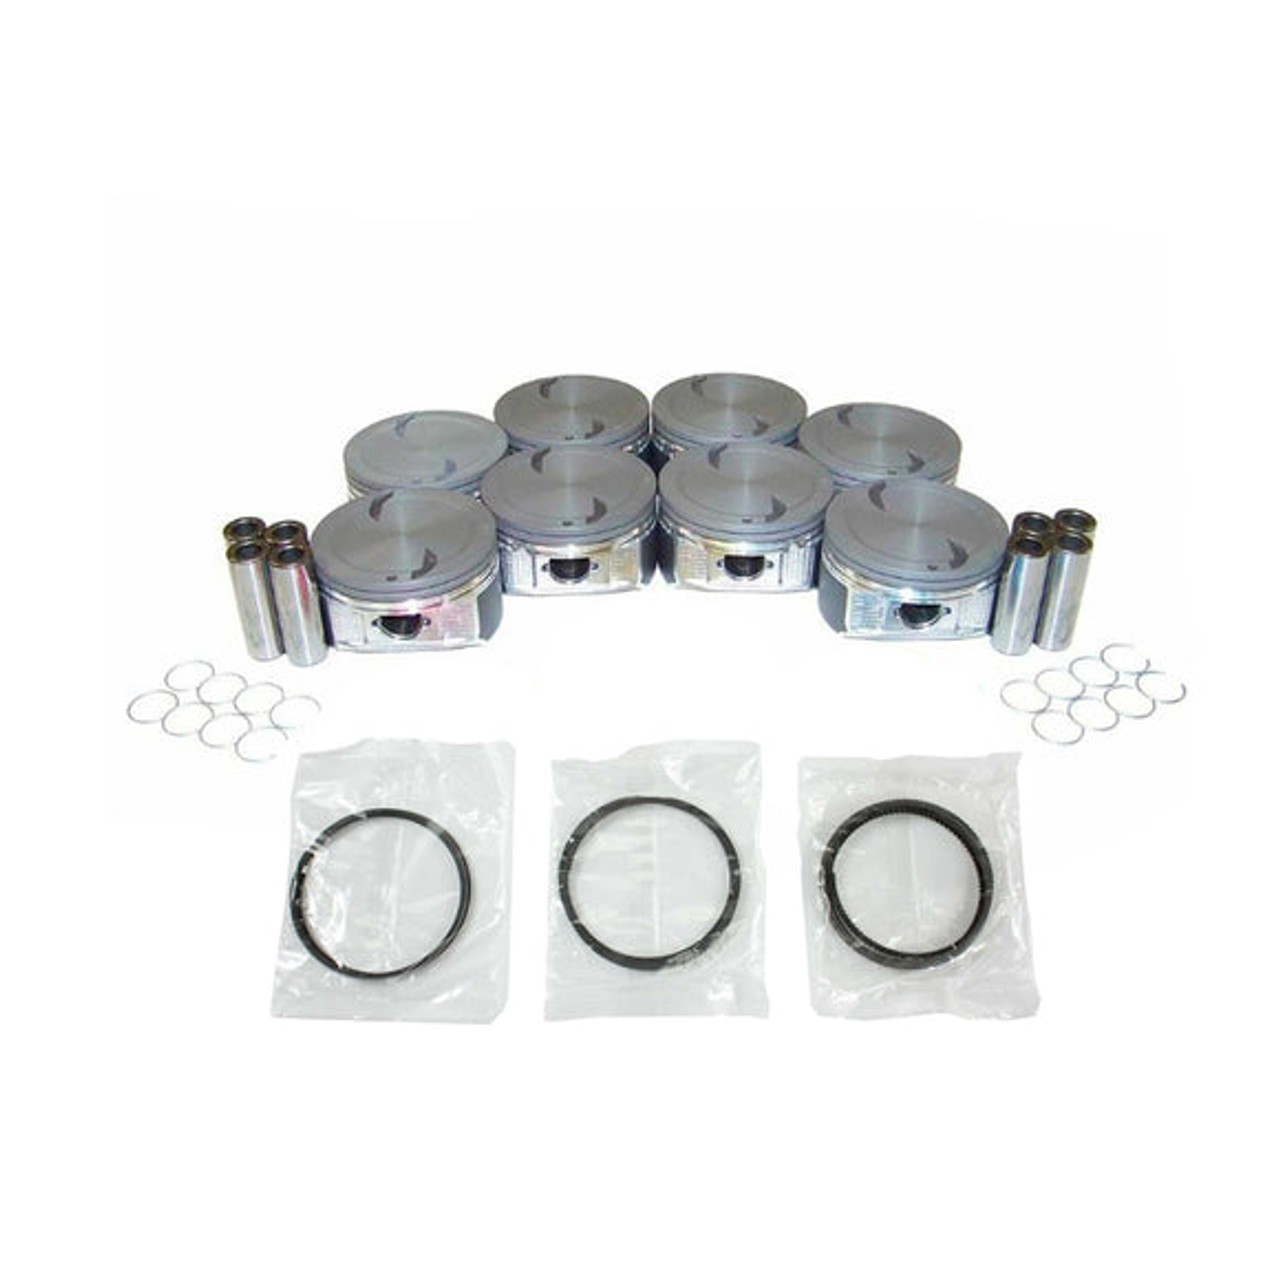 Piston Set with Rings - 2006 Hummer H2 6.0L Engine Parts # PRK3169ZE291